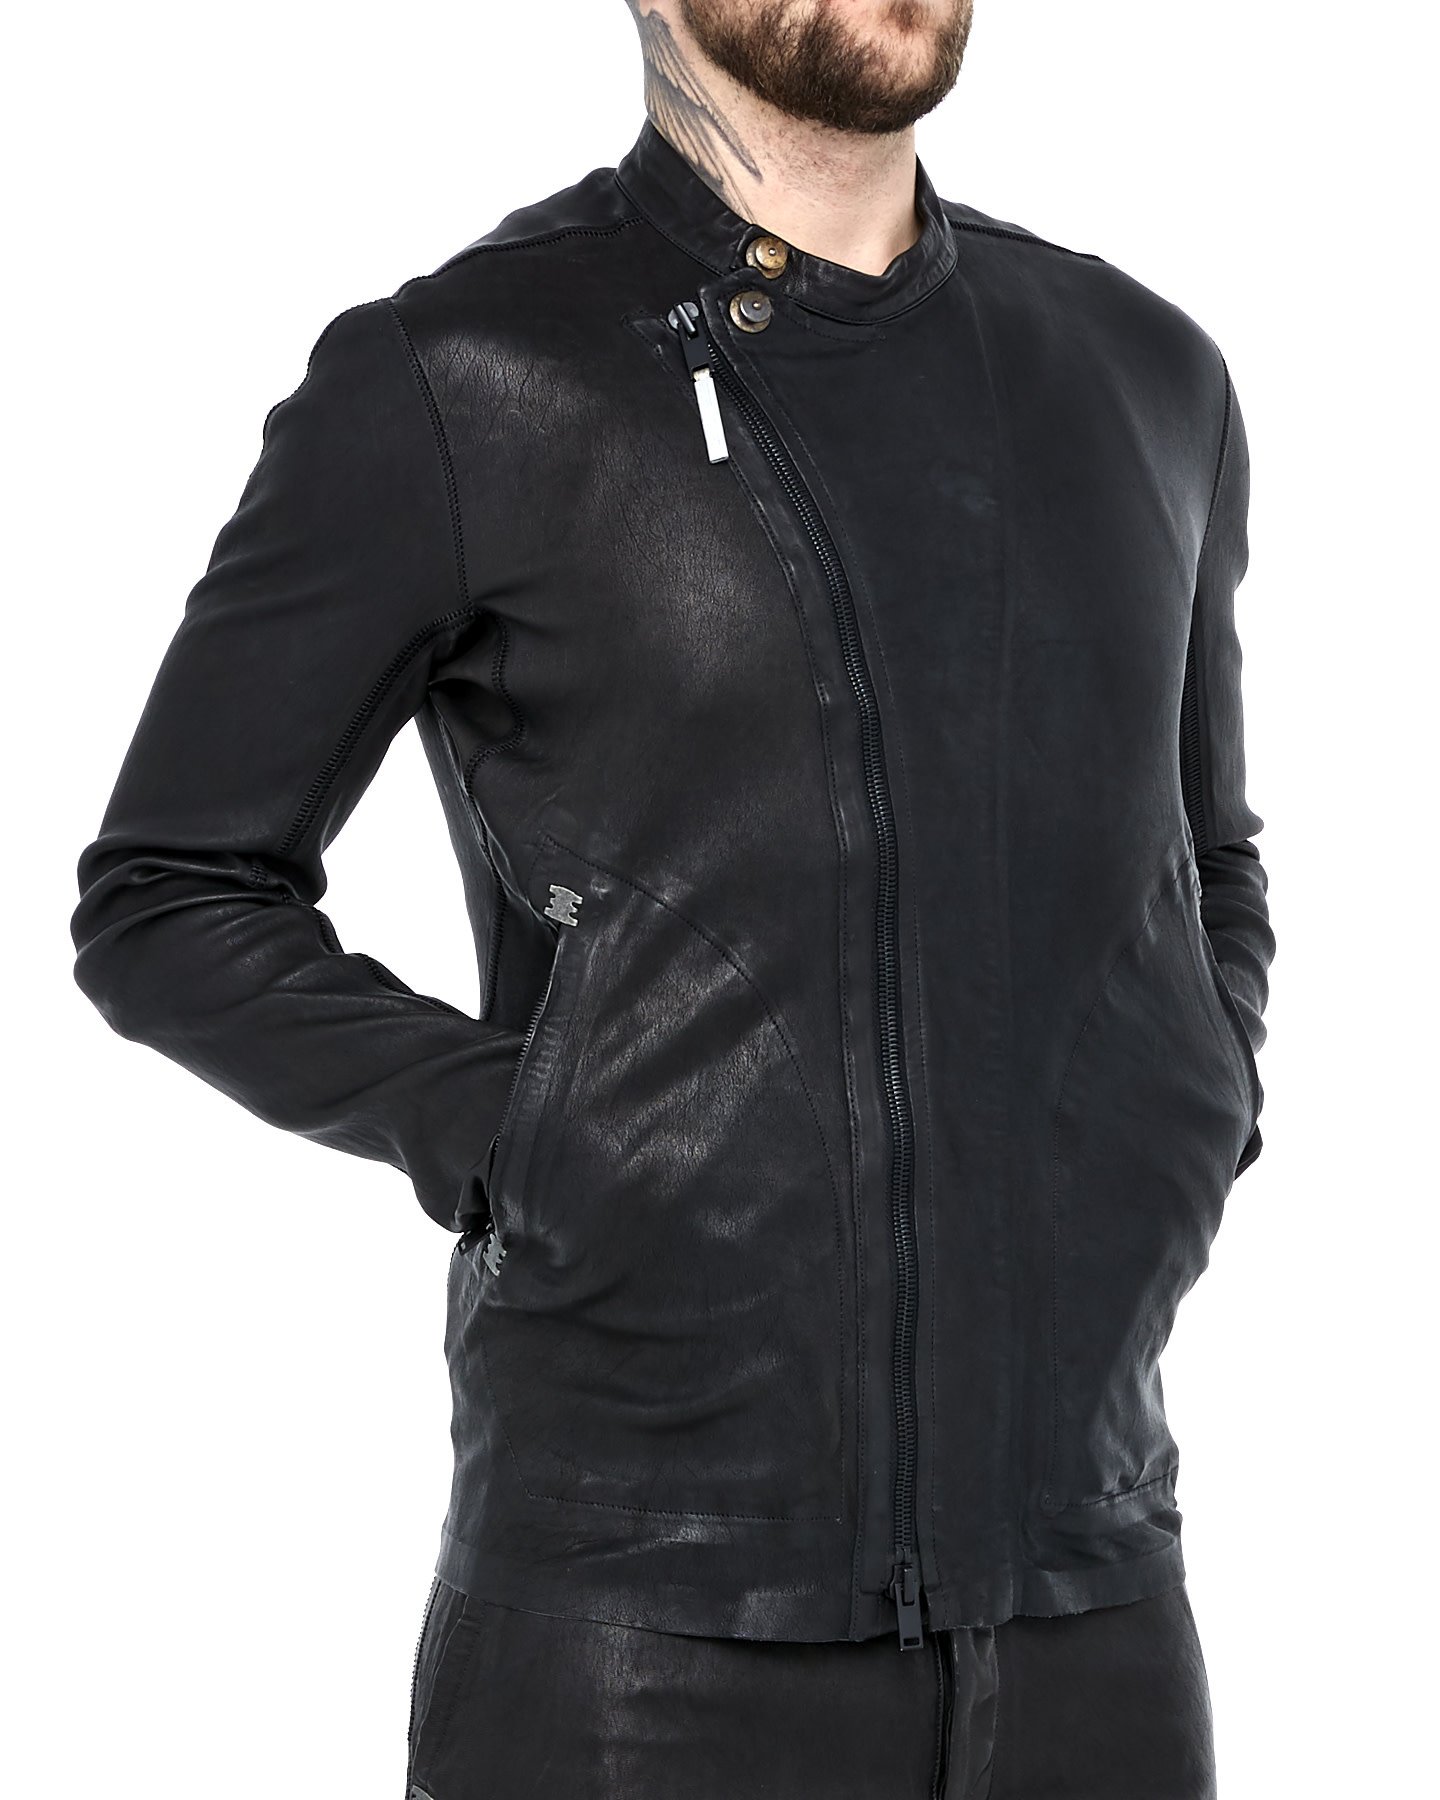 Bute Neo Stretch Leather Jacket Untitled Shop Untitled NYC Isaac Shop NYC - | Sellam by